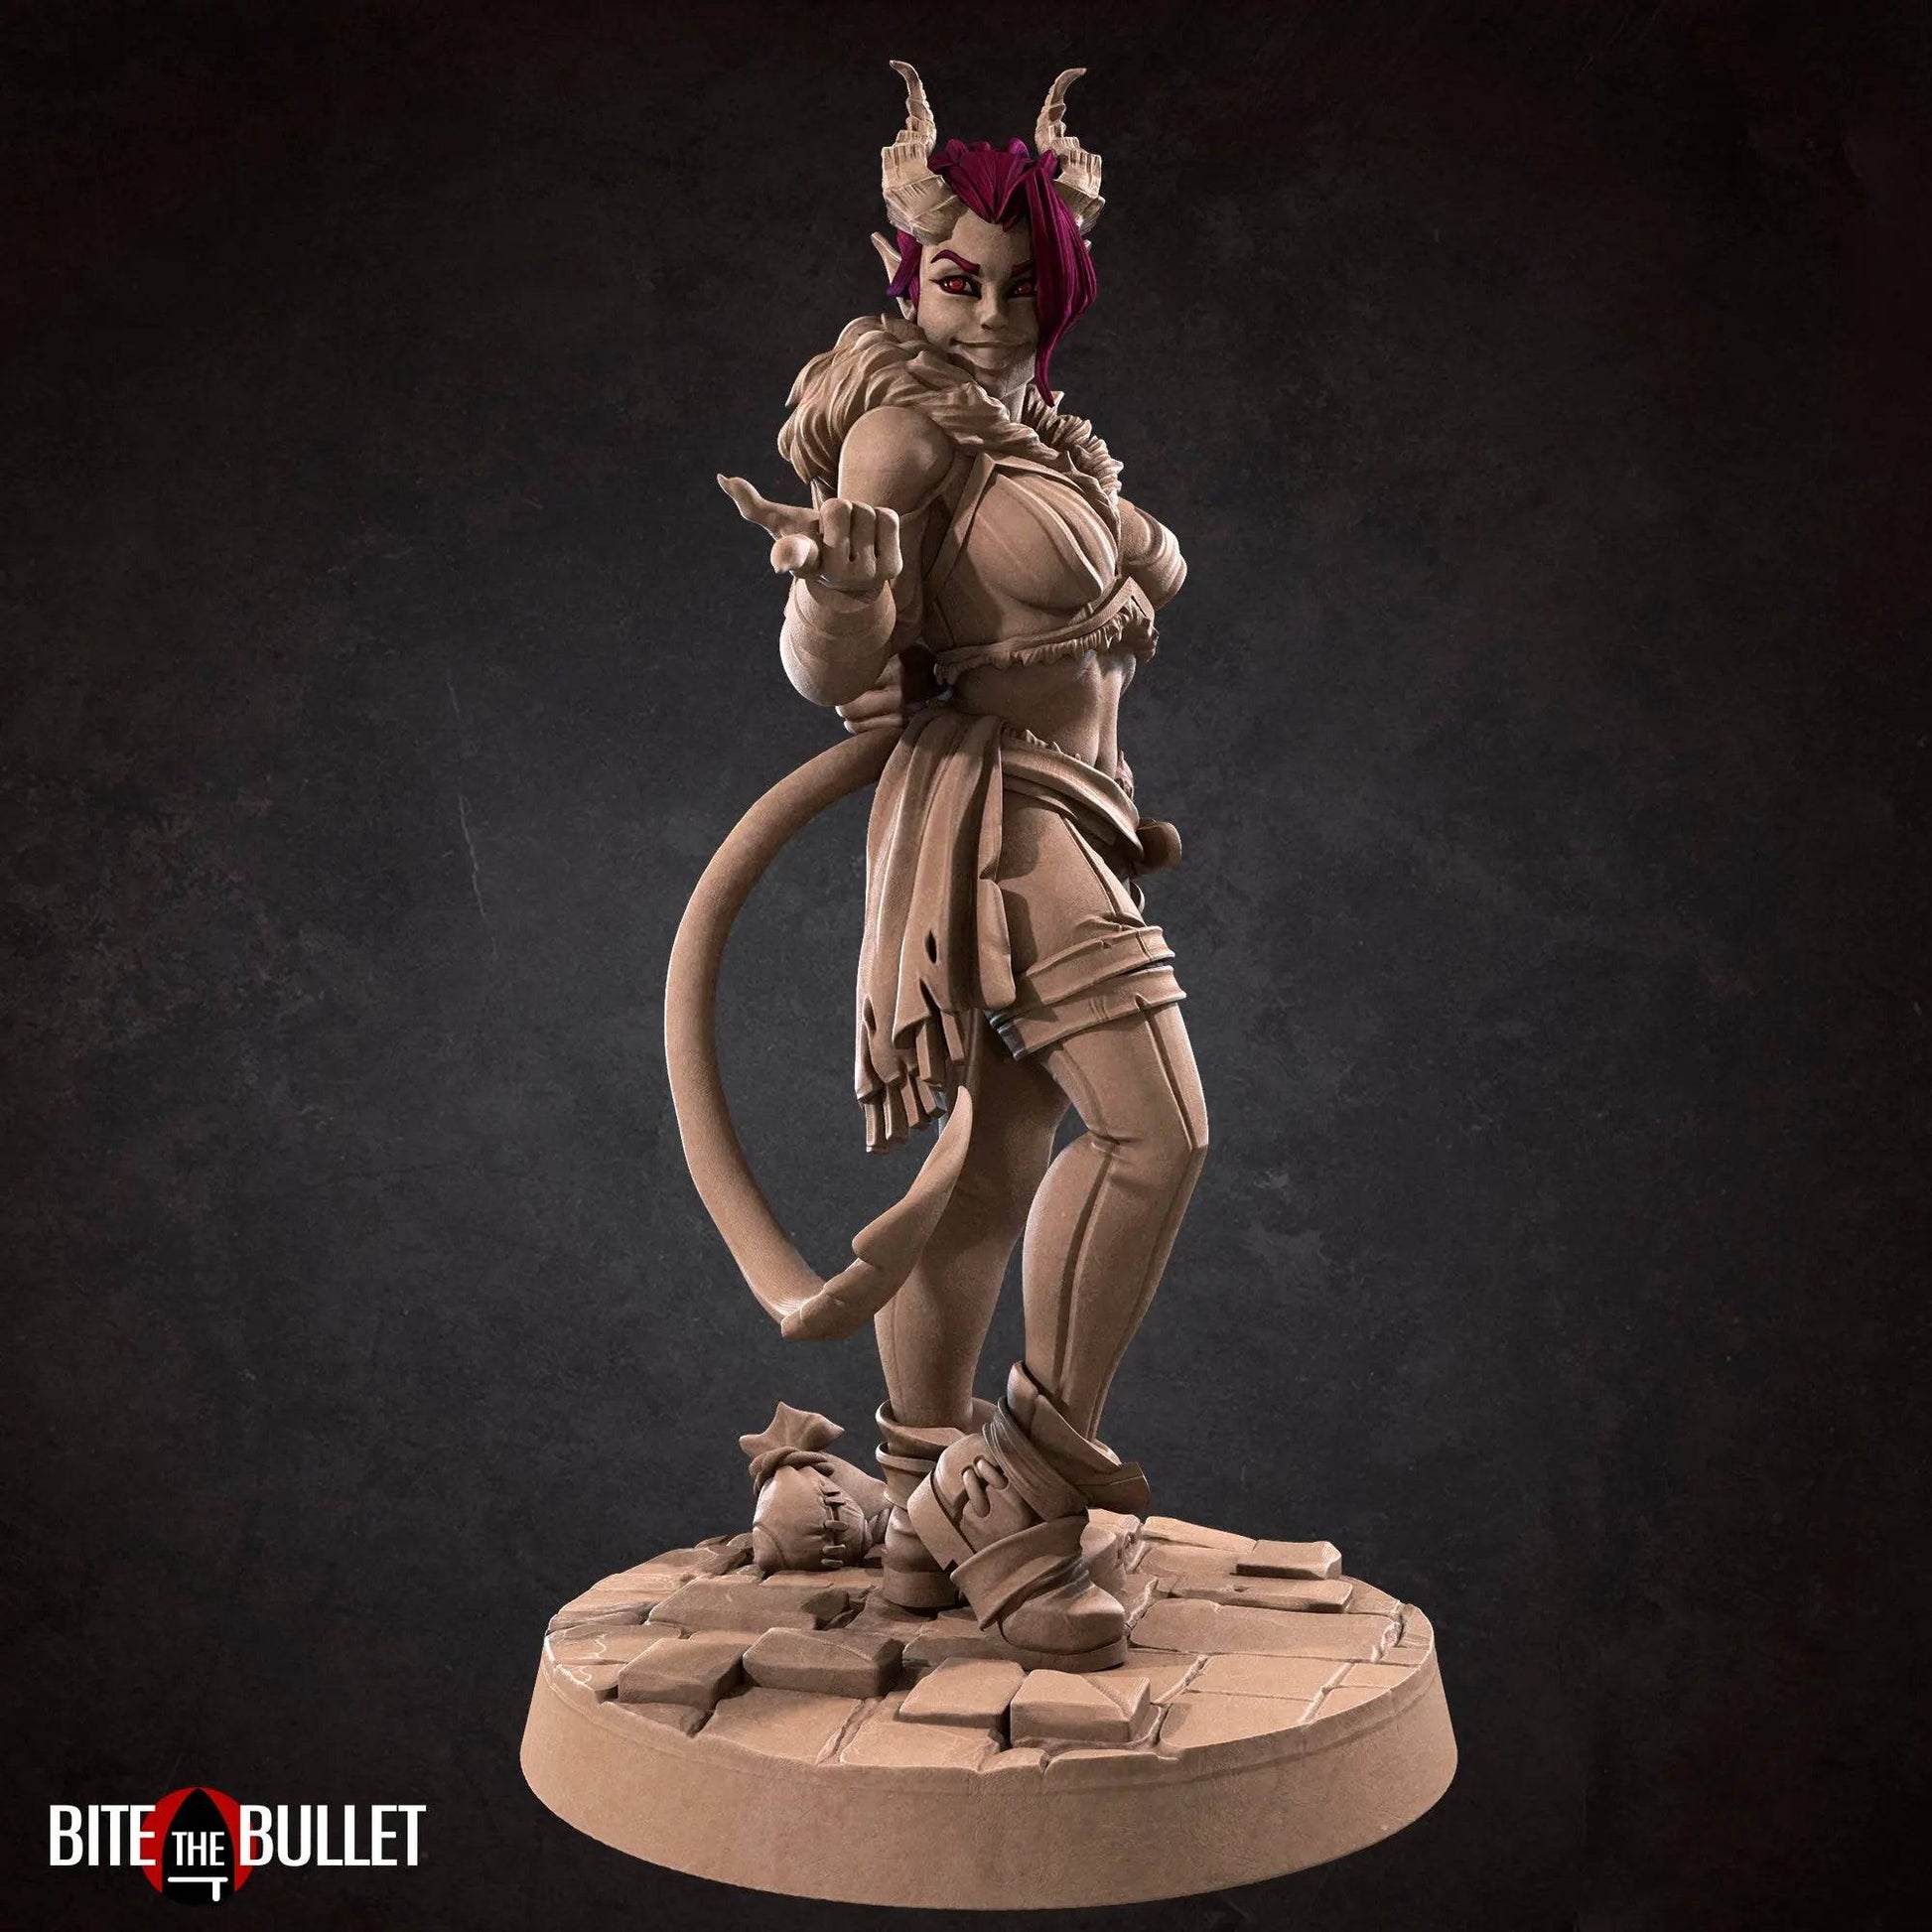 Fiona, Pinup SFW NSFW Lovely Woman, Tiefling Hiding Knife | D&D Miniature Pinup | Bite the Bullet - Tattles Told 3D